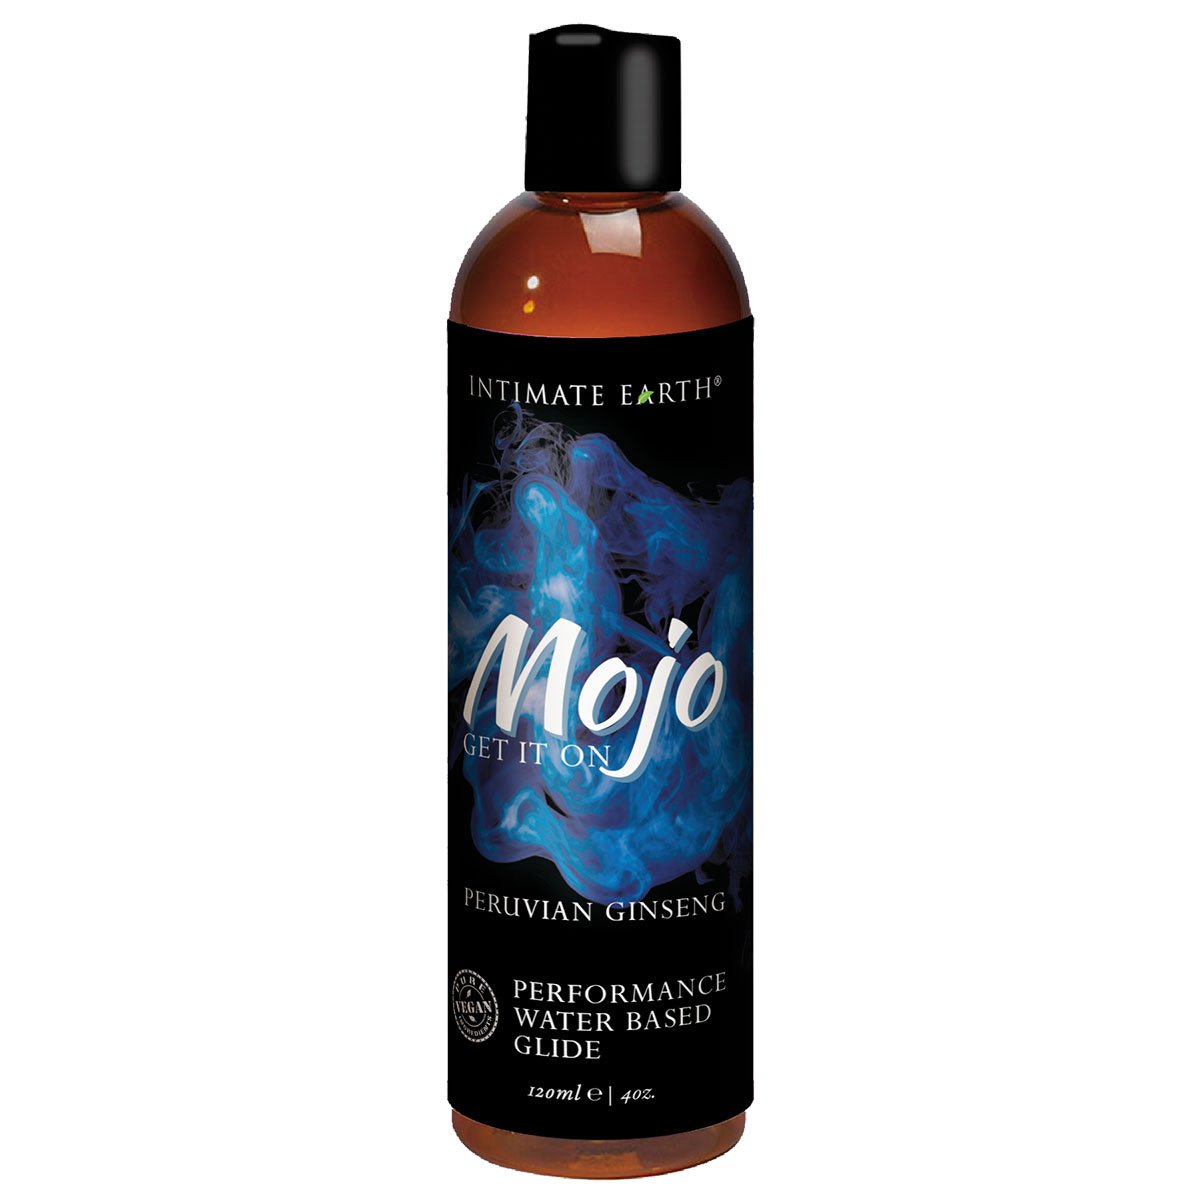 Intimate Earth MOJO Peruvian Ginseng Water Based Performance Glide 4oz-120ml - Buy At Luxury Toy X - Free 3-Day Shipping